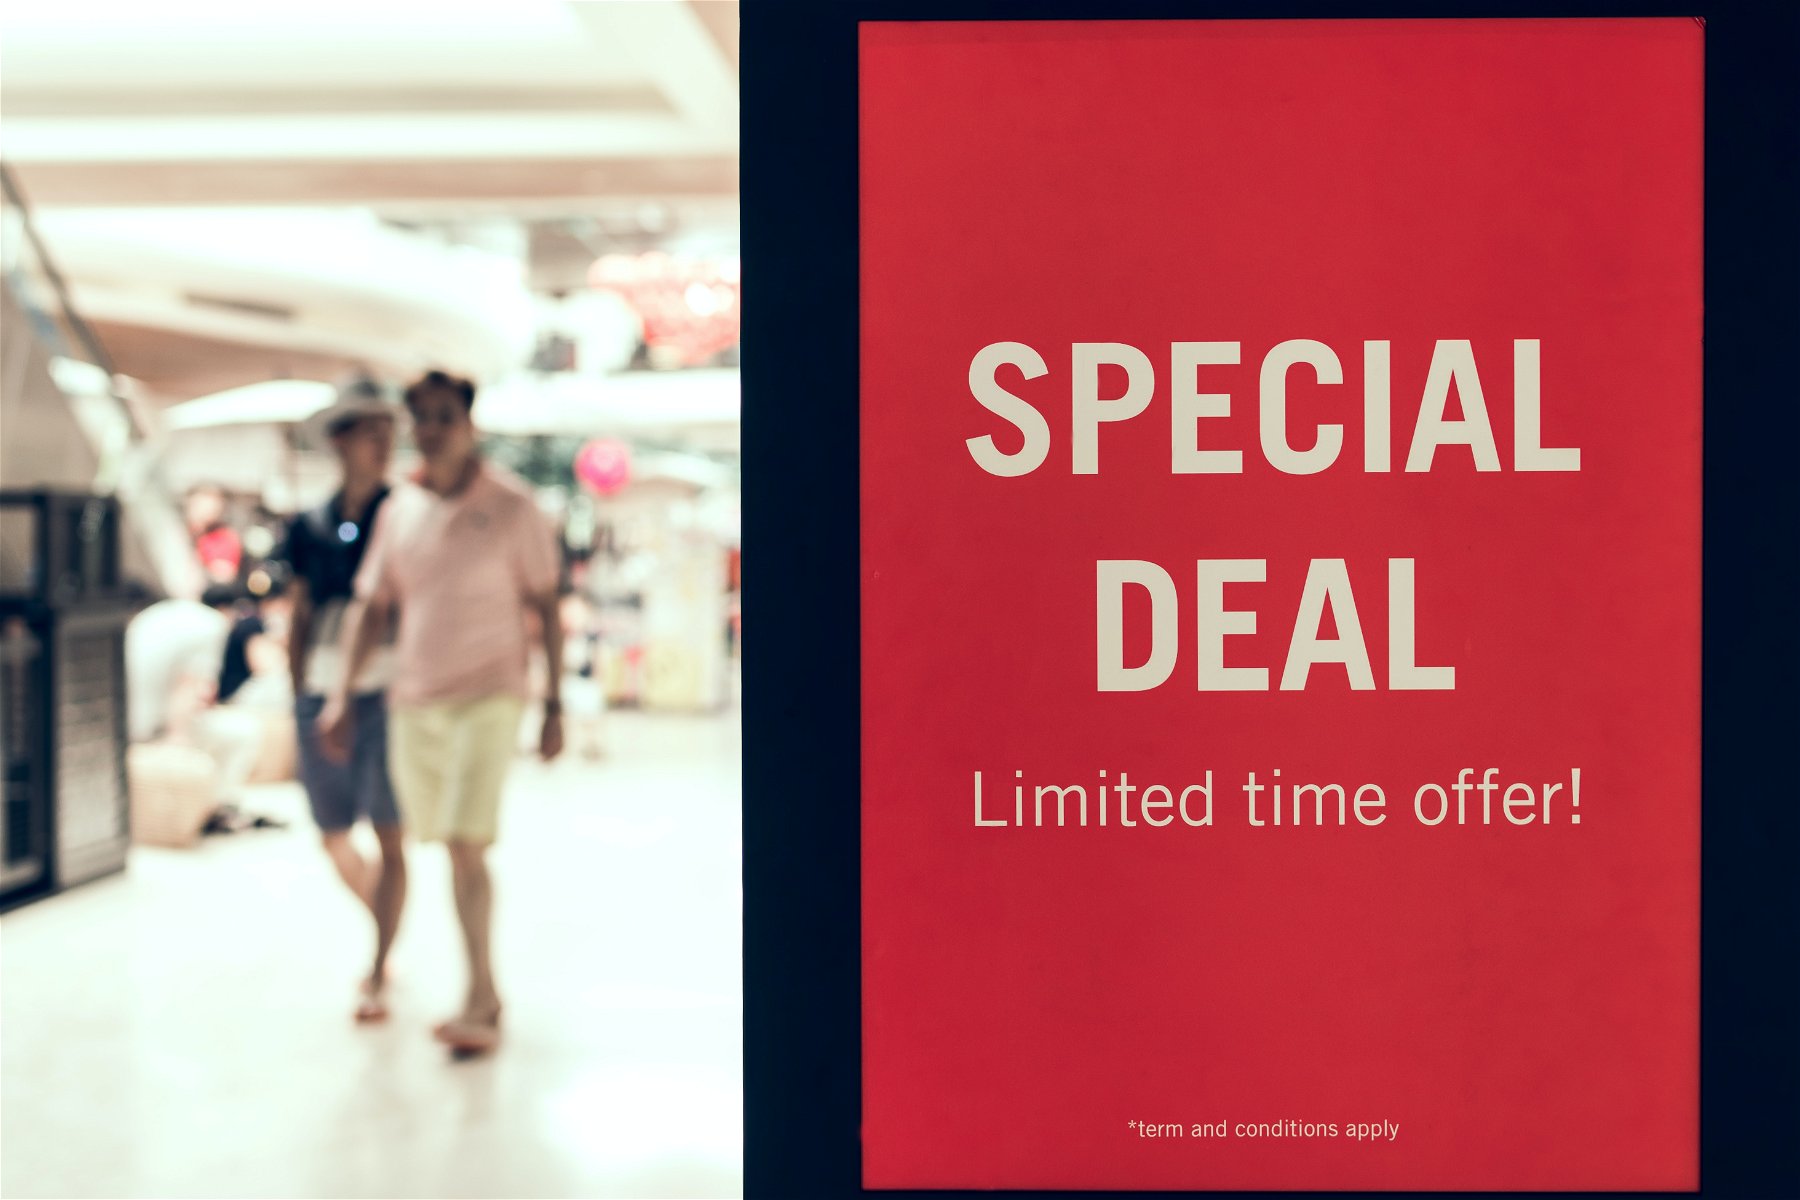 How to Use PriceHusky to Find the Best Deals on Shopee Singapore During the Holidays